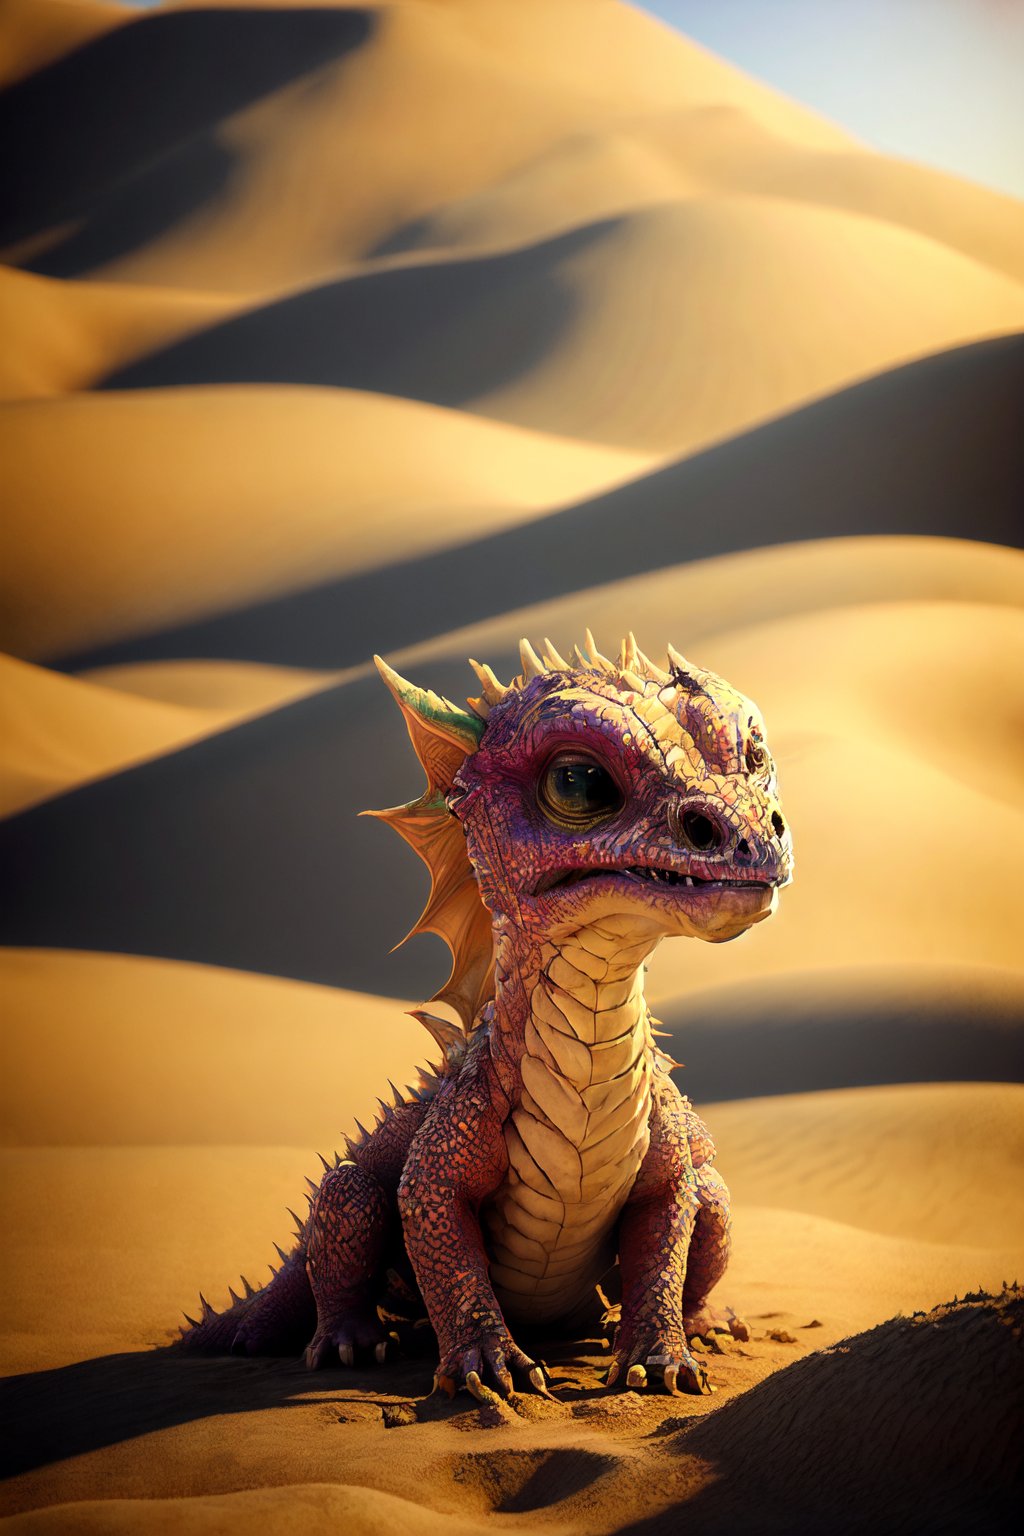 A red dragon charges through the chaos of a battlefield in the desert,

,photorealistic